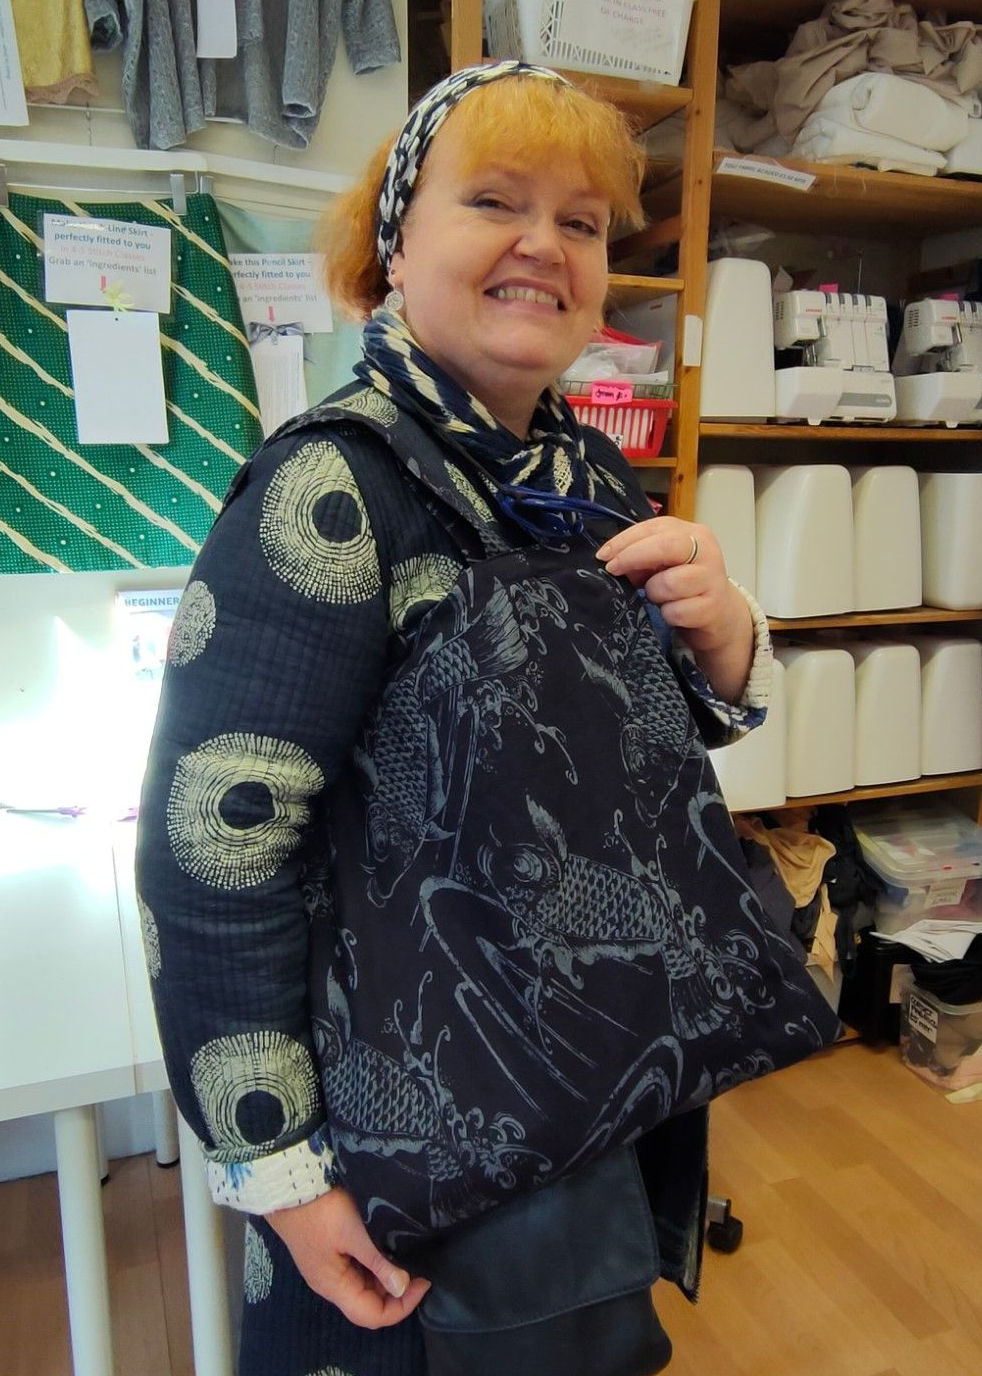 Helen made this Tote bag as a total beginner to sewing in Stitch Open sewing sessions at Sew In Brighton, East Sussex